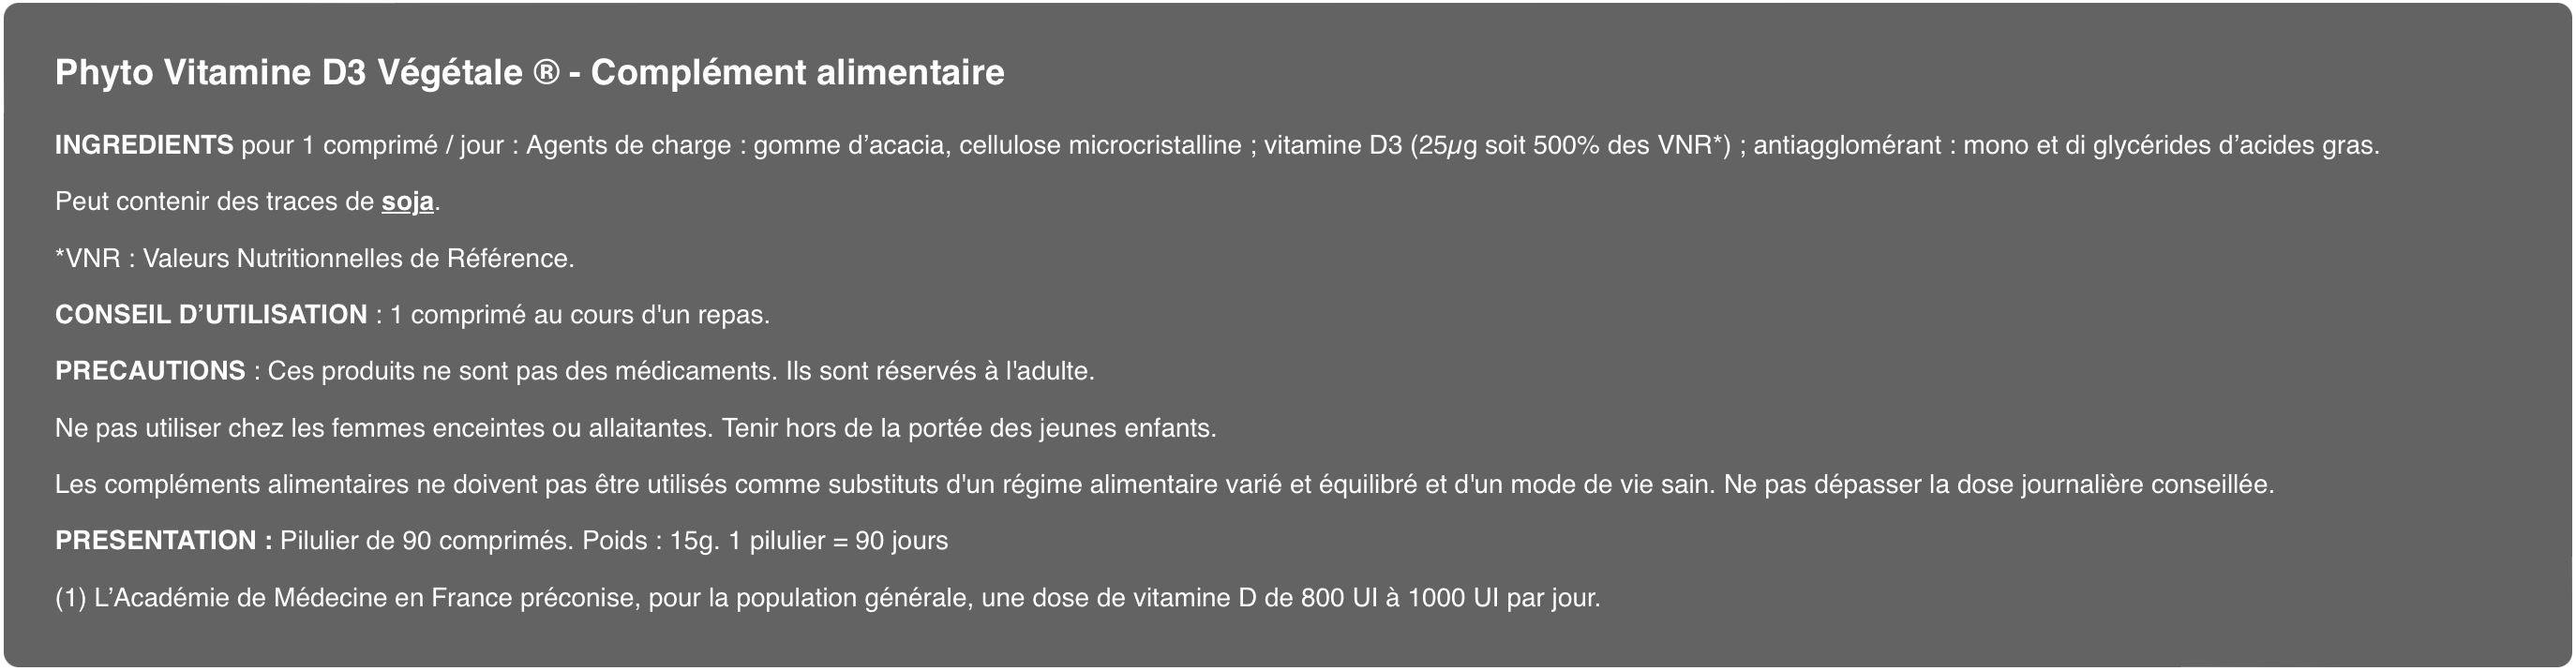 Vitamine D3 - mentions